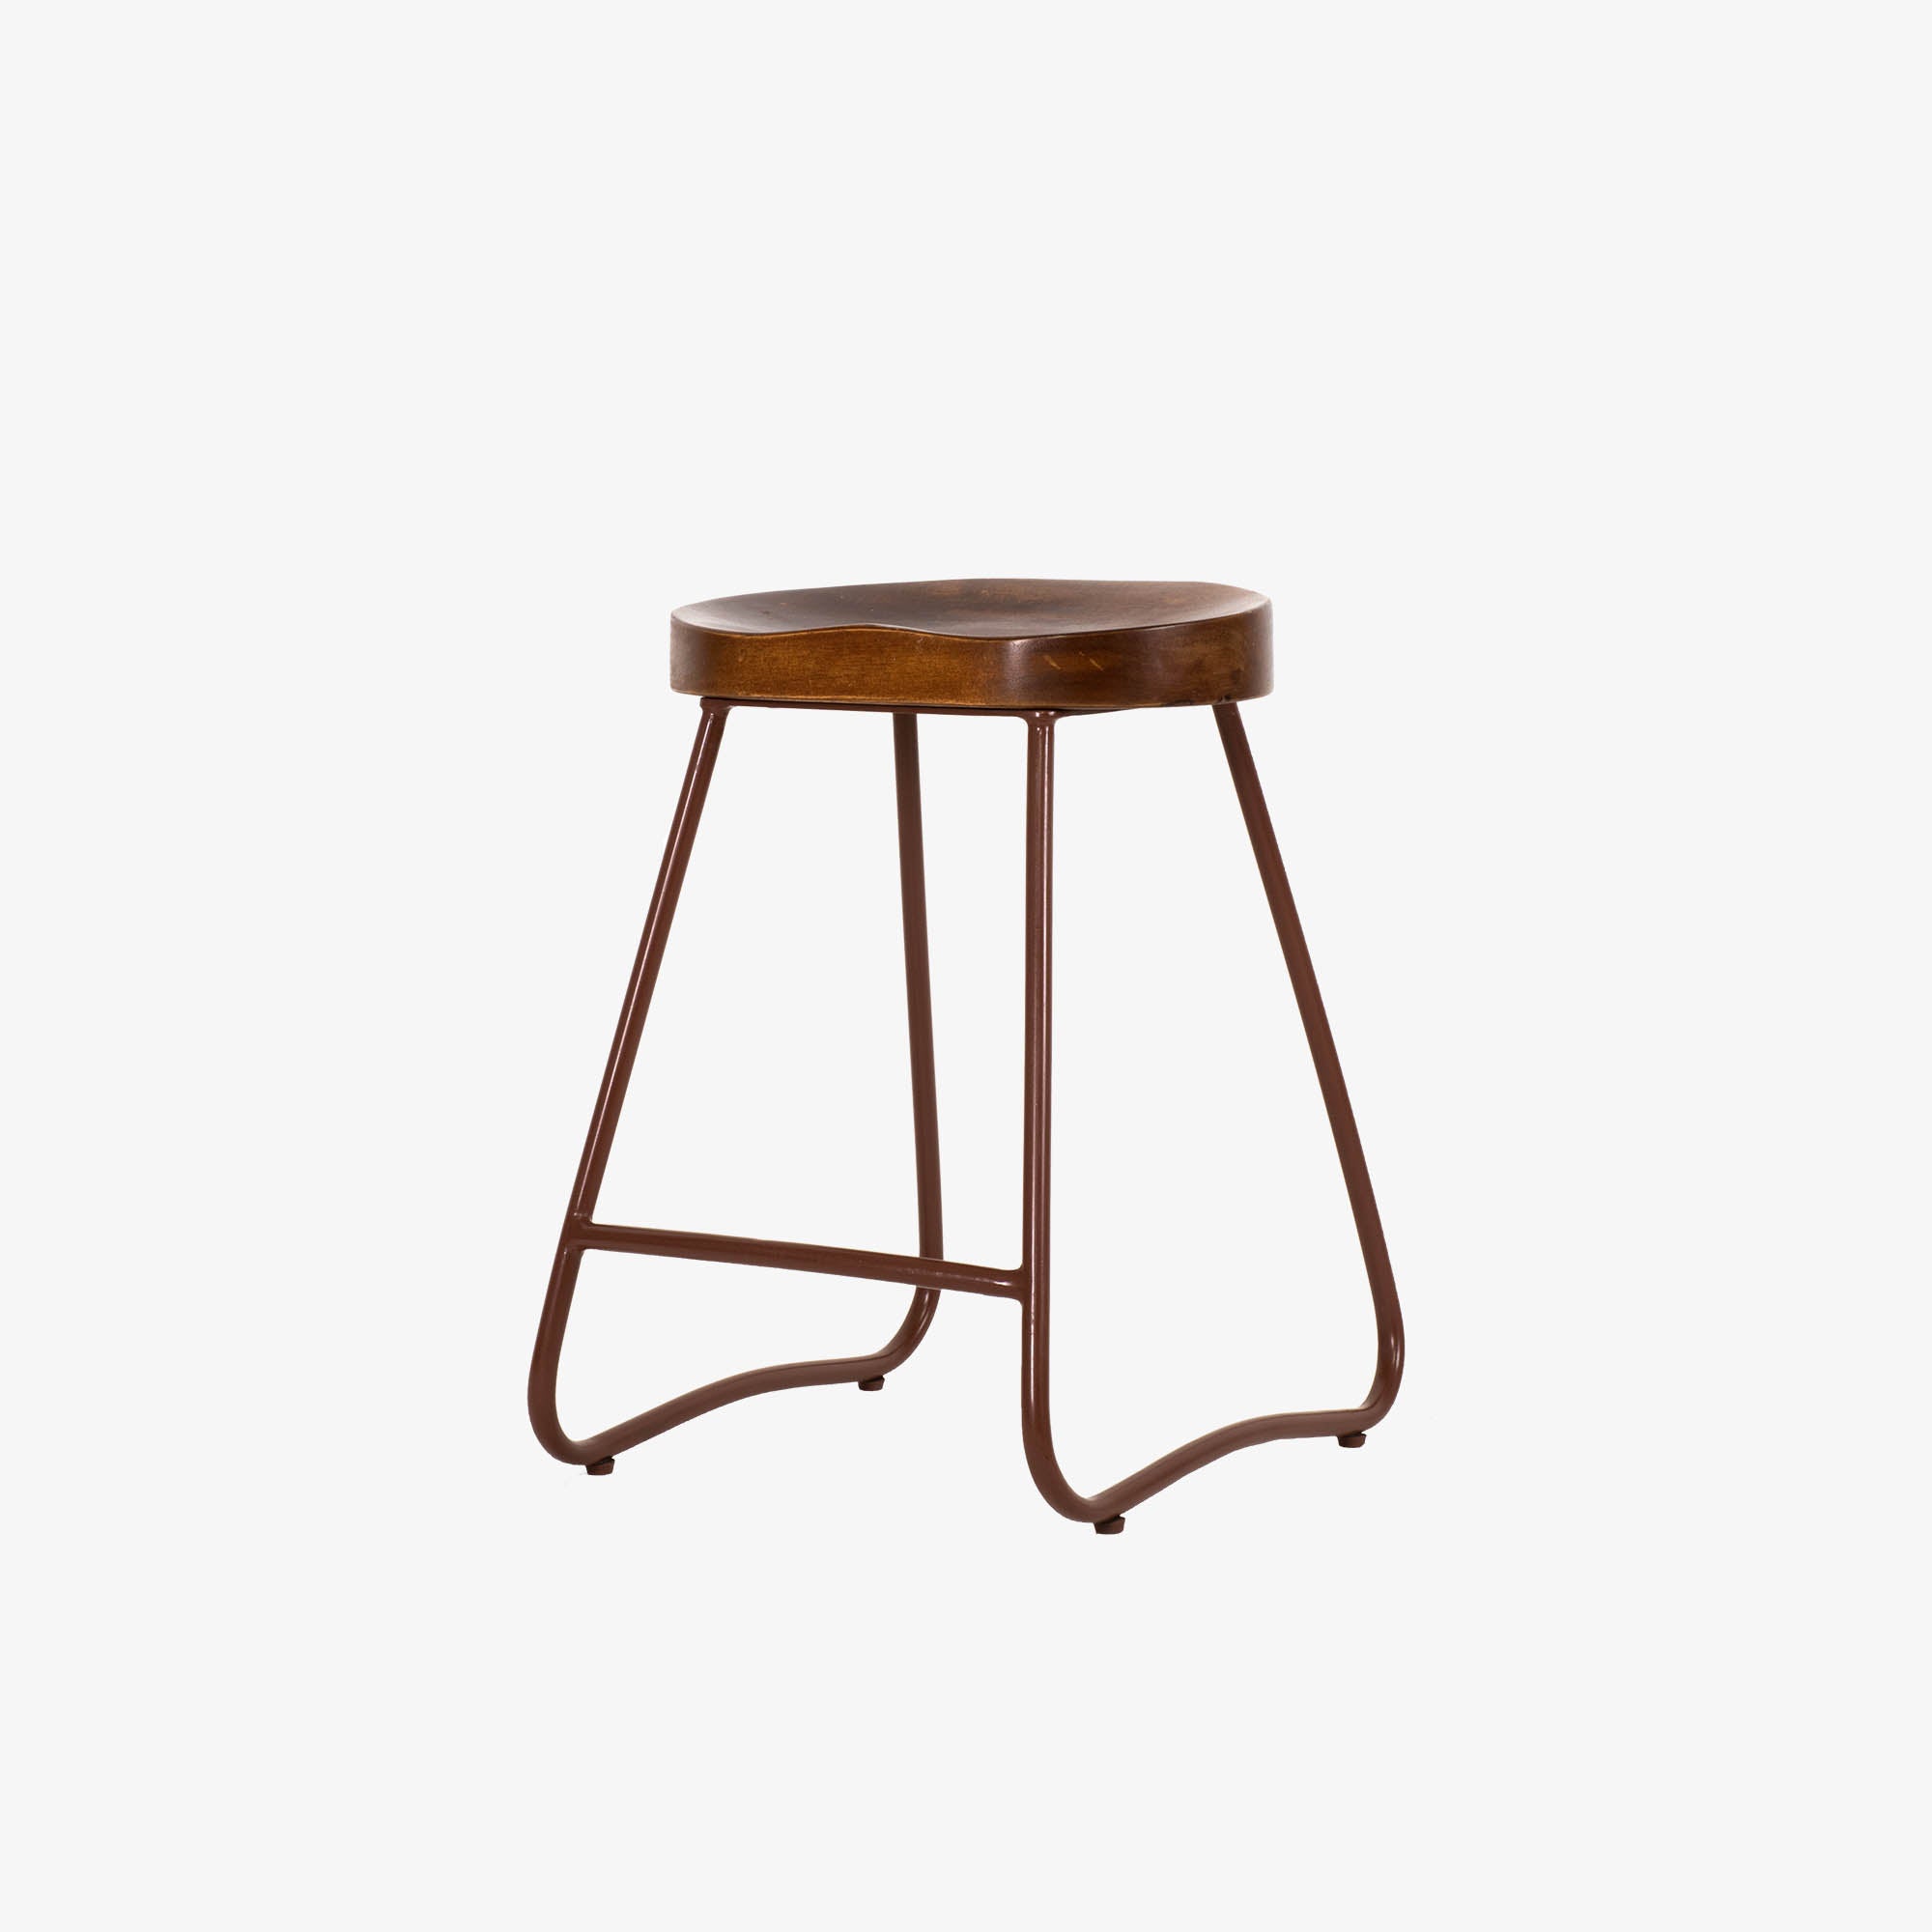 Stool finly – olive green